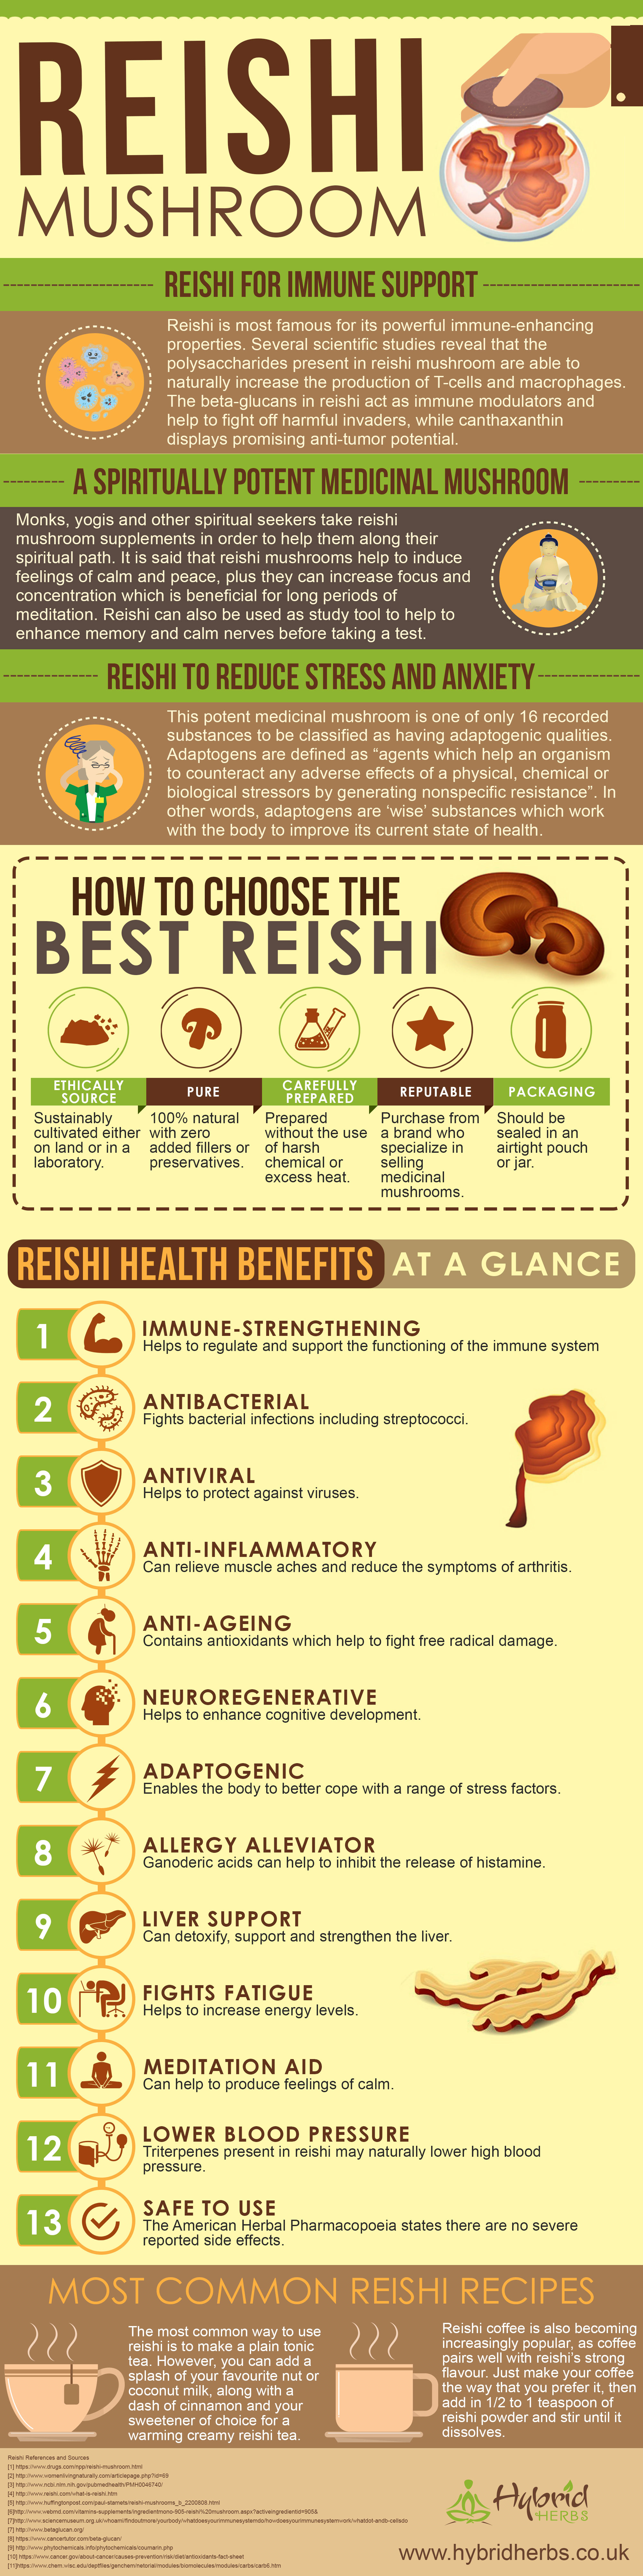 Reishi Mushrooms For Better Health: What You Need To Know Infographic